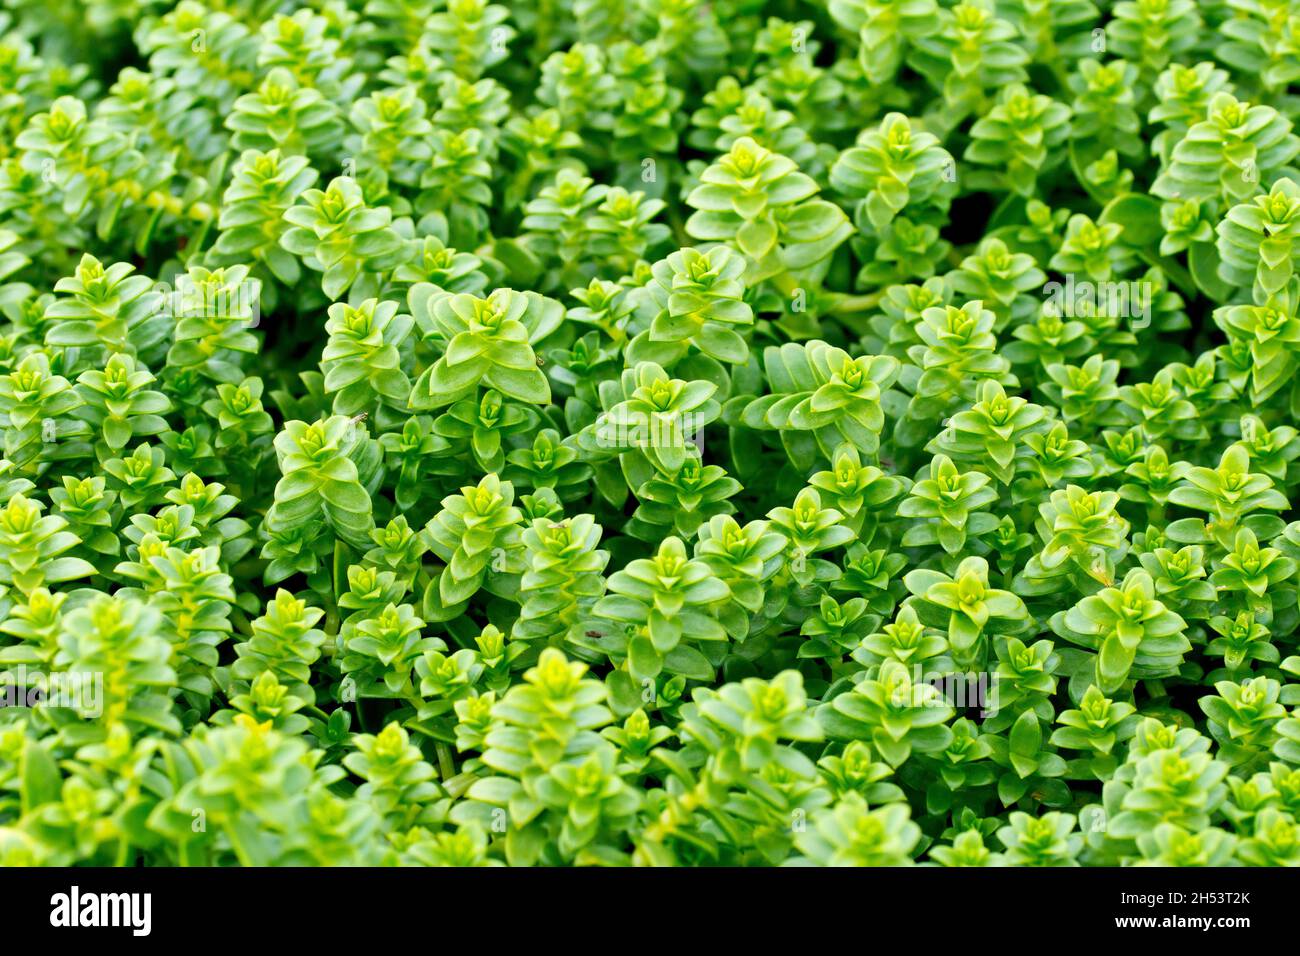 Sea Sandwort (honkenya peploides), close up showing a thick mat of the coastal plant growing at the high tide line. Stock Photo